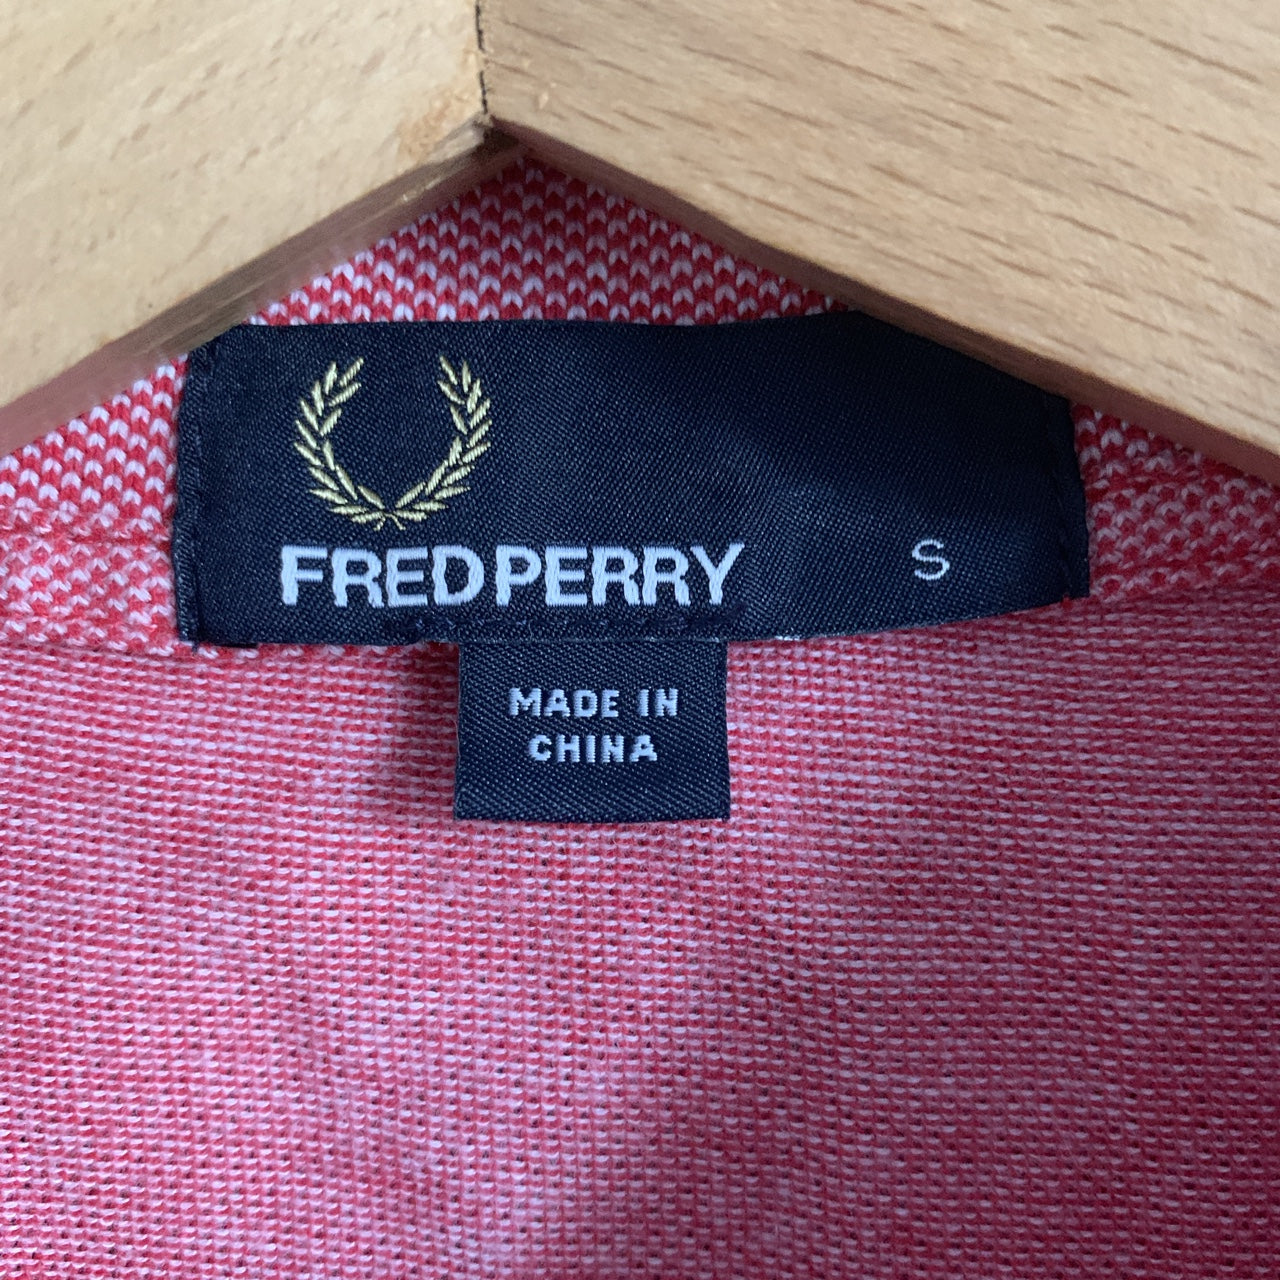 Fred Perry Vintage Salmon Pink 100% Cotton Polo Shirt Size S